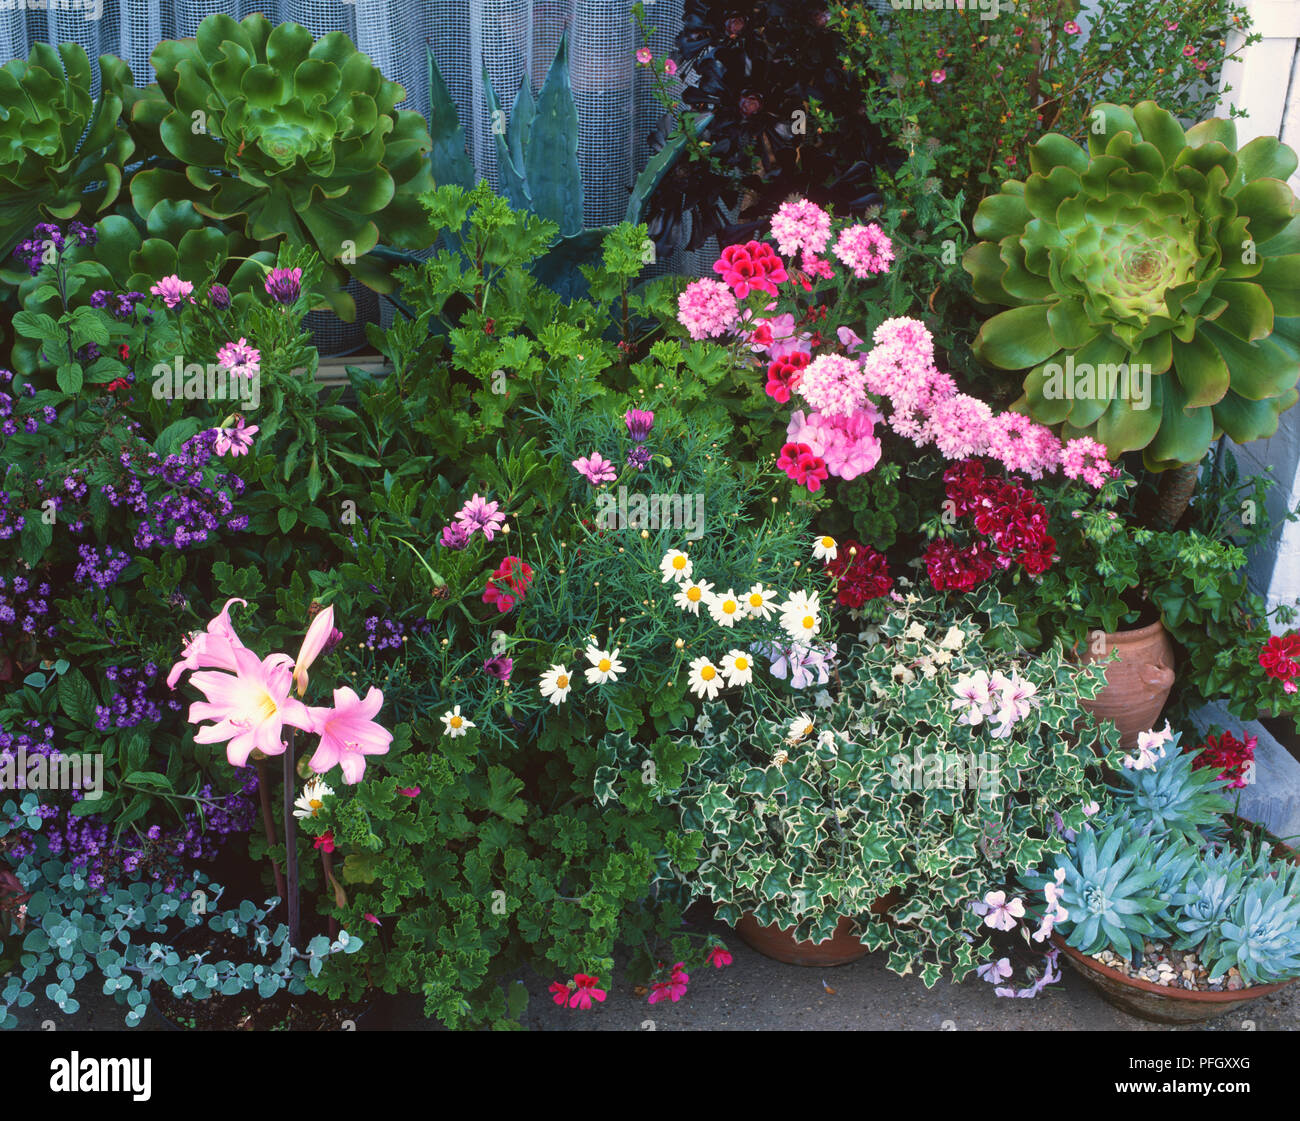 Large selection of potted colourful flowers and leafy green plants in garden display, including Bellis, Daisy, Lilium, Lily, Dianthus, Carnation and Chrysanthemum. Stock Photo